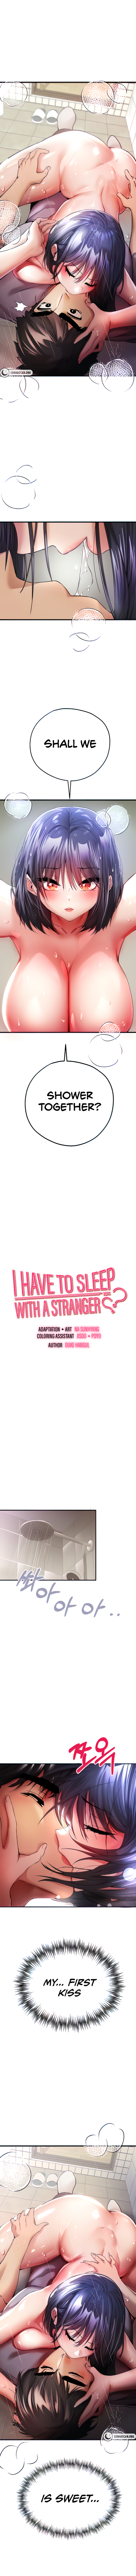 I Have To Sleep With A Stranger? NEW image